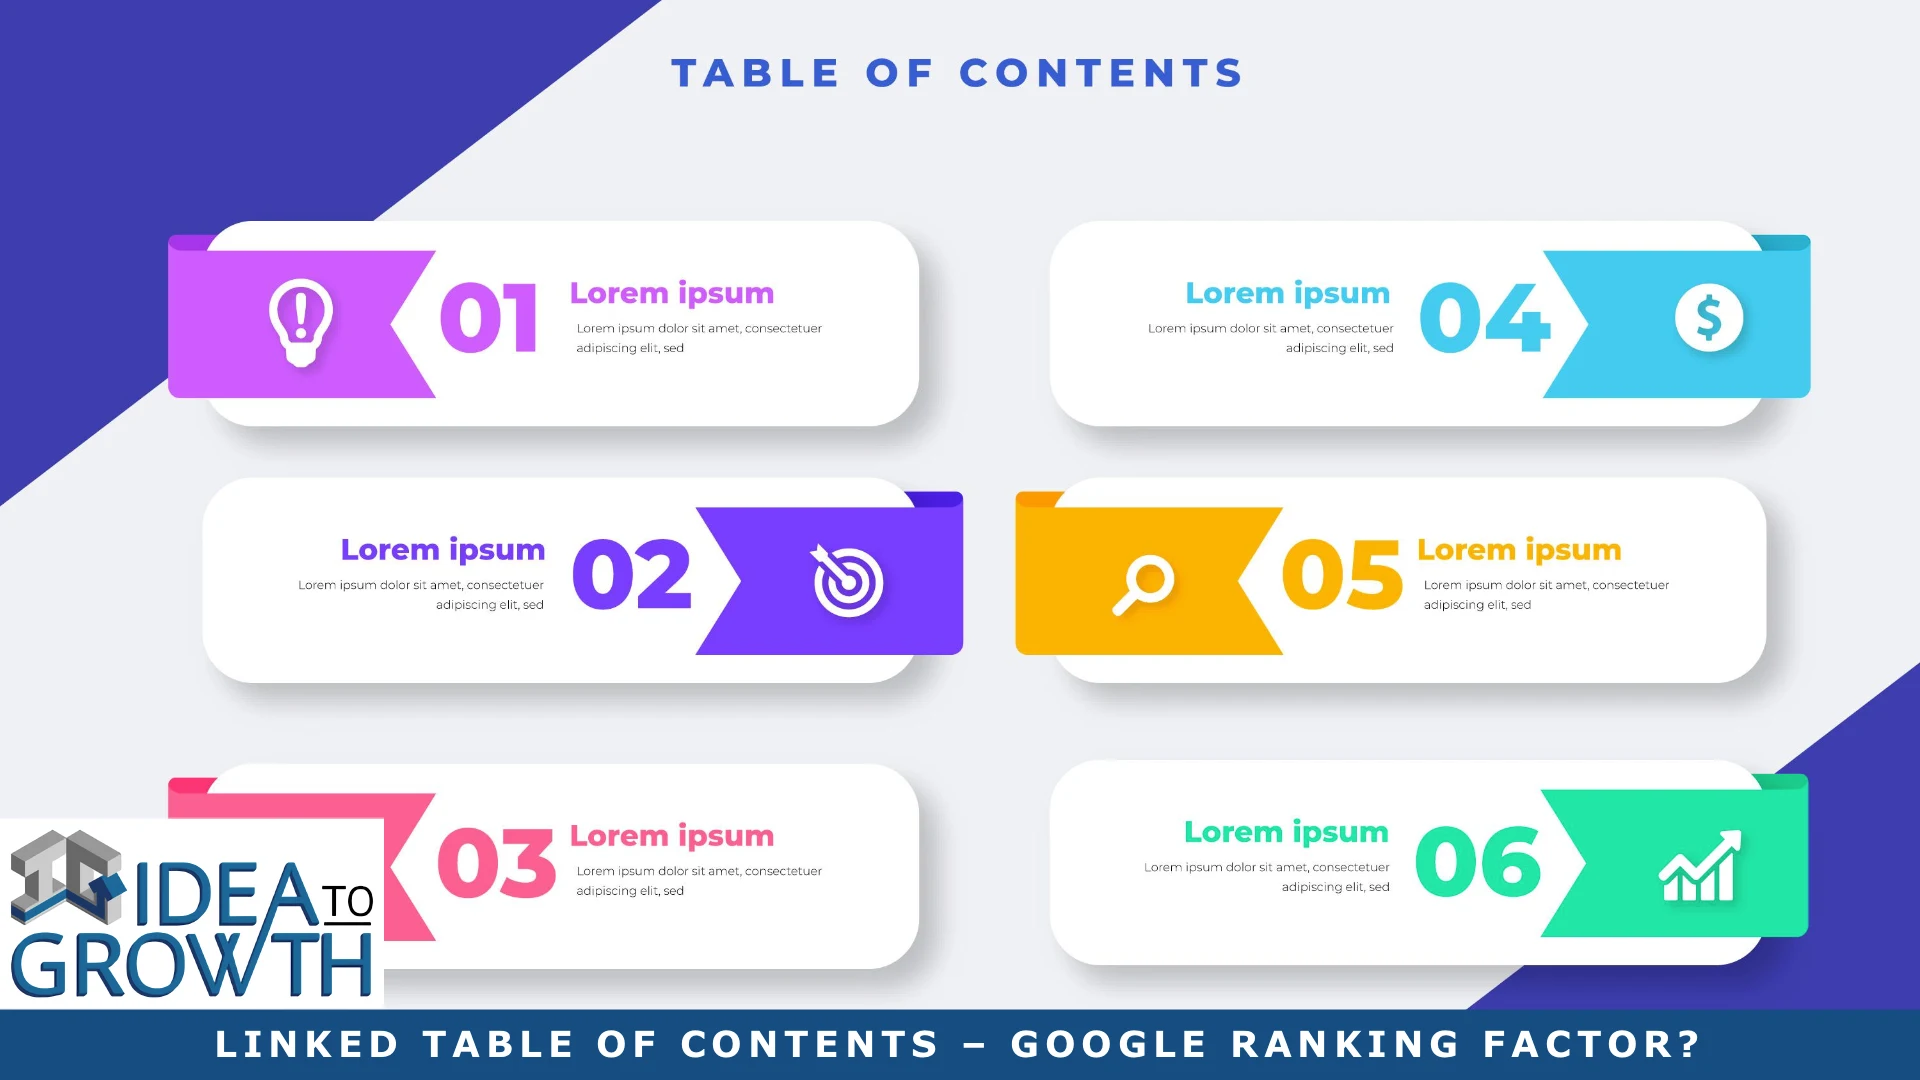 LINKED TABLE OF CONTENTS – GOOGLE RANKING FACTOR?